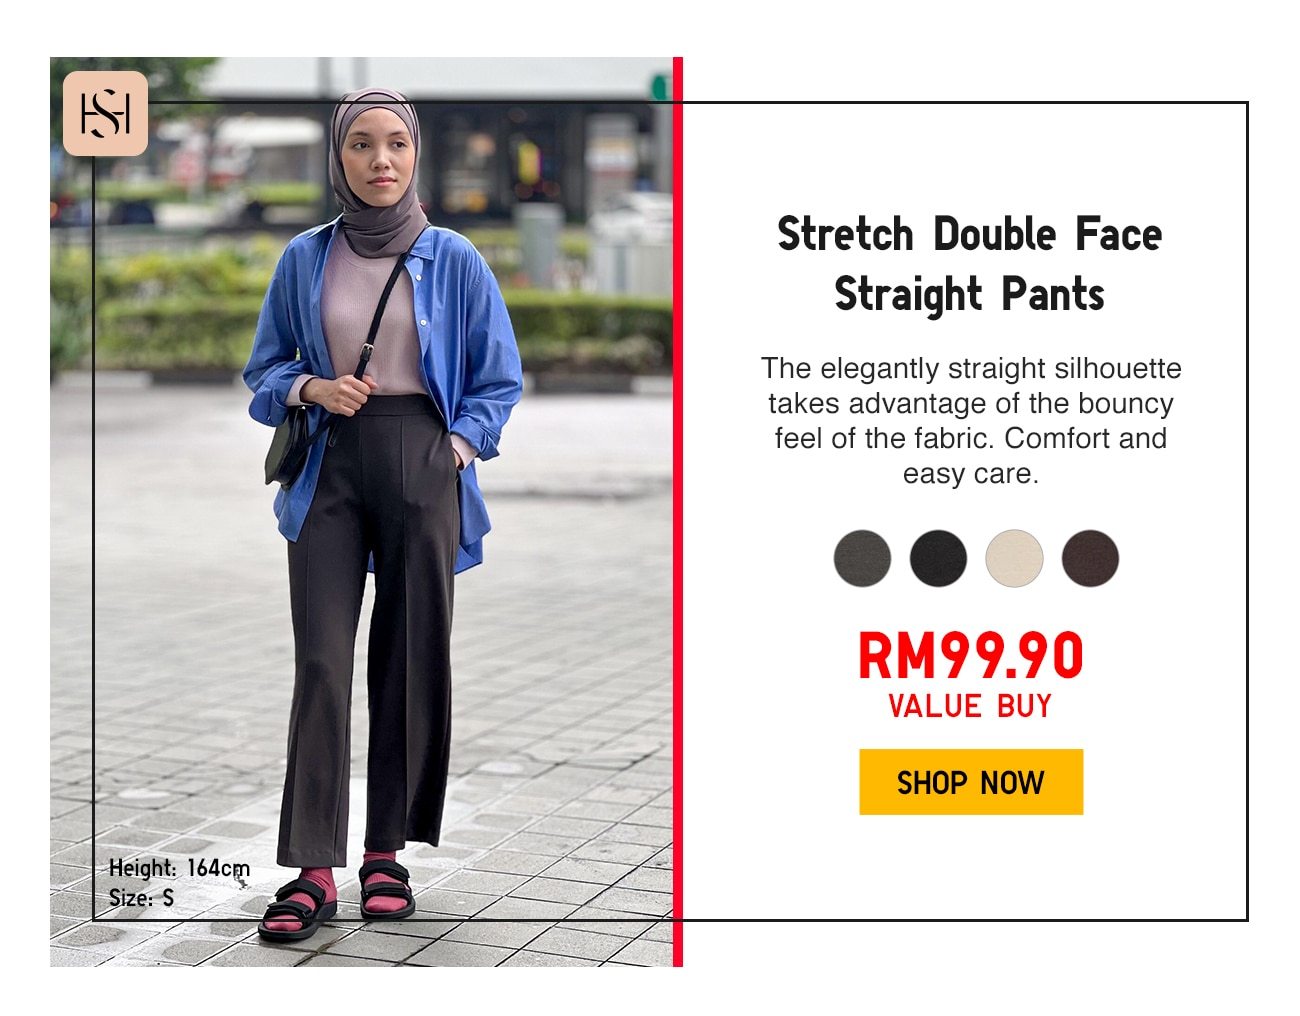 Stretch Double Face Straight Pants